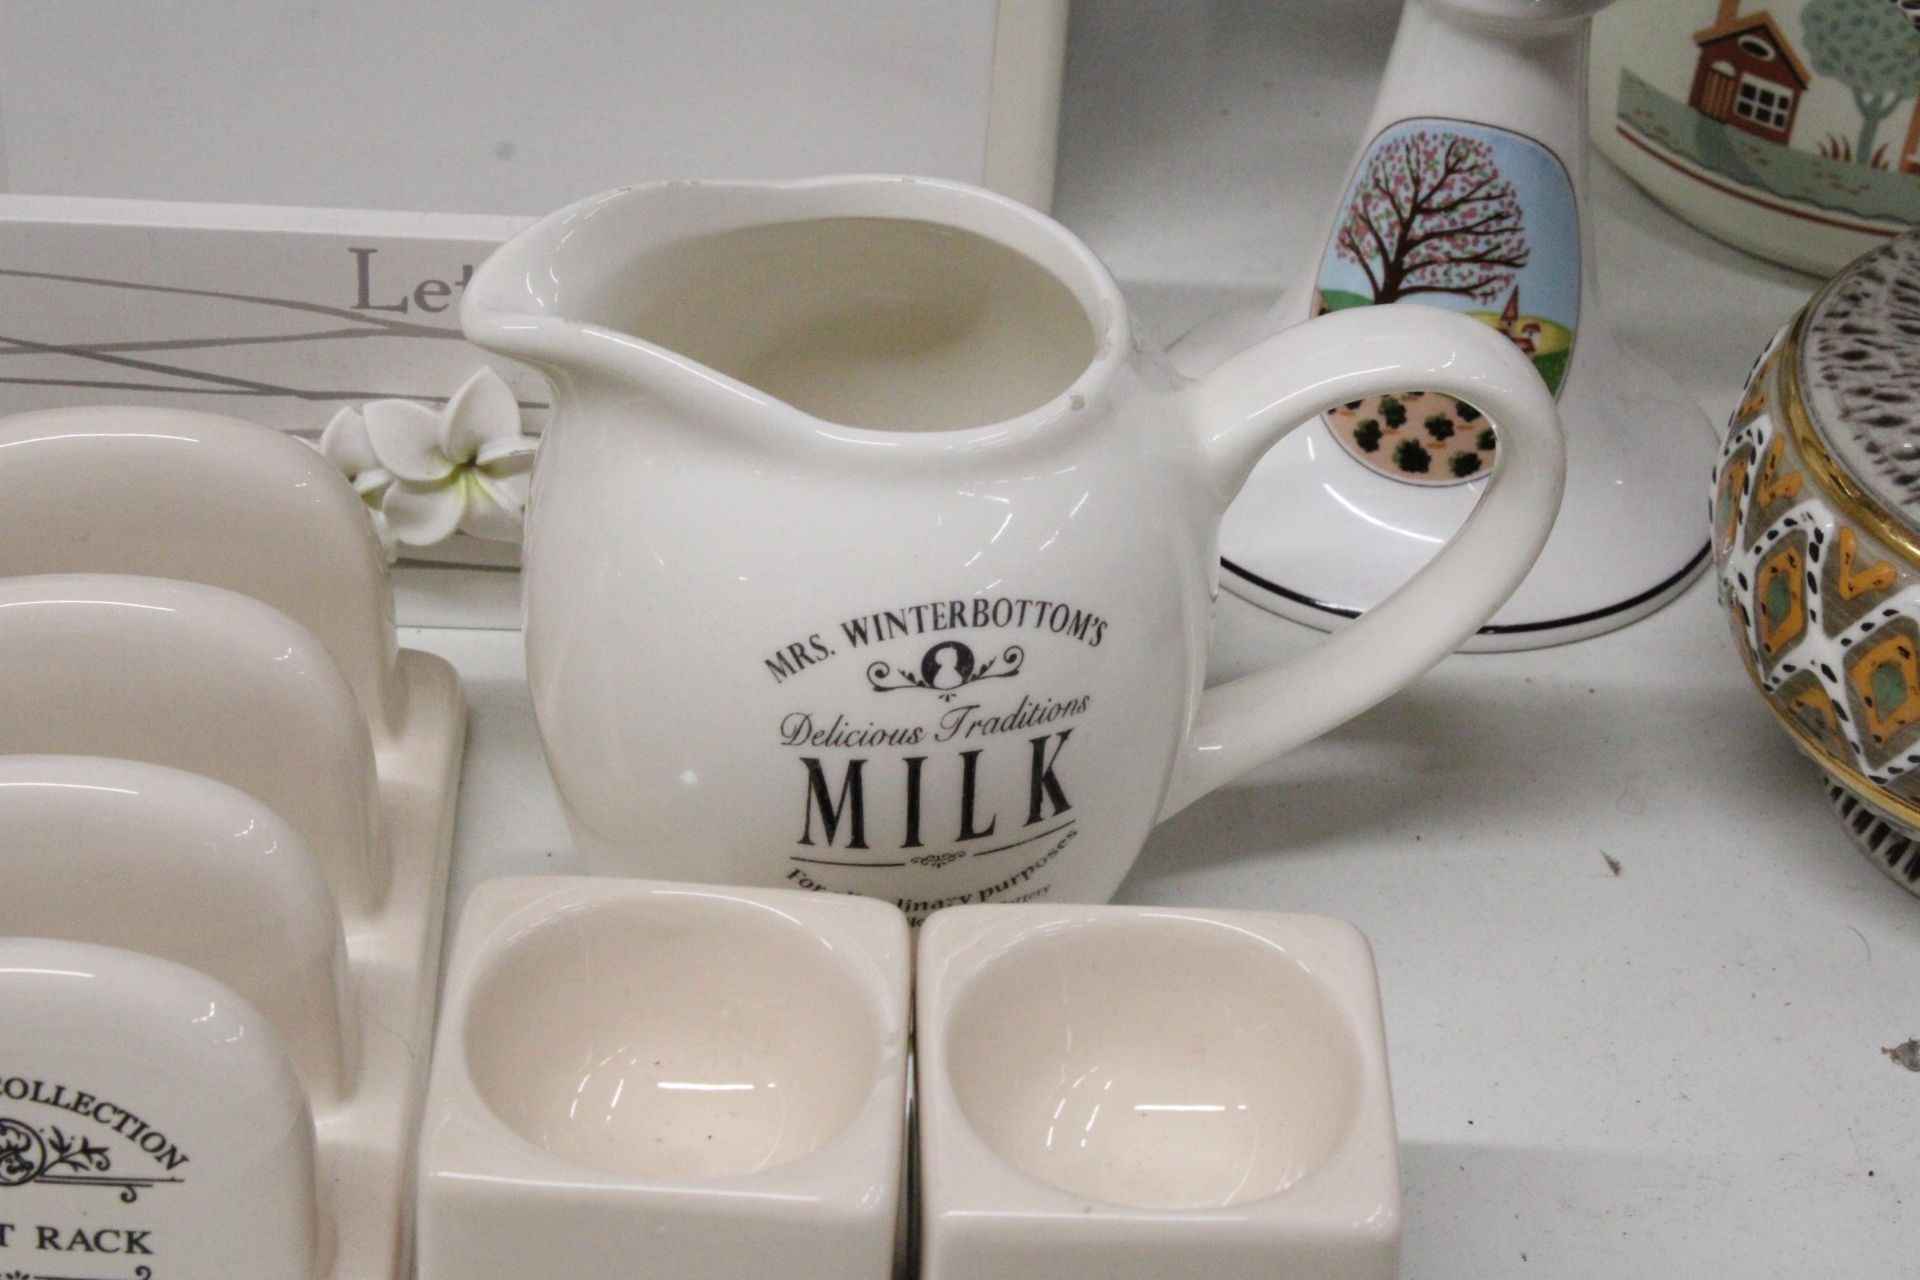 A SET OF MRS WINTERBOTTOM'S 'DELICIOUS TRADITIONS' TABLEWARE TO INCLUDE A MILK JUG, OIL AND - Image 4 of 5